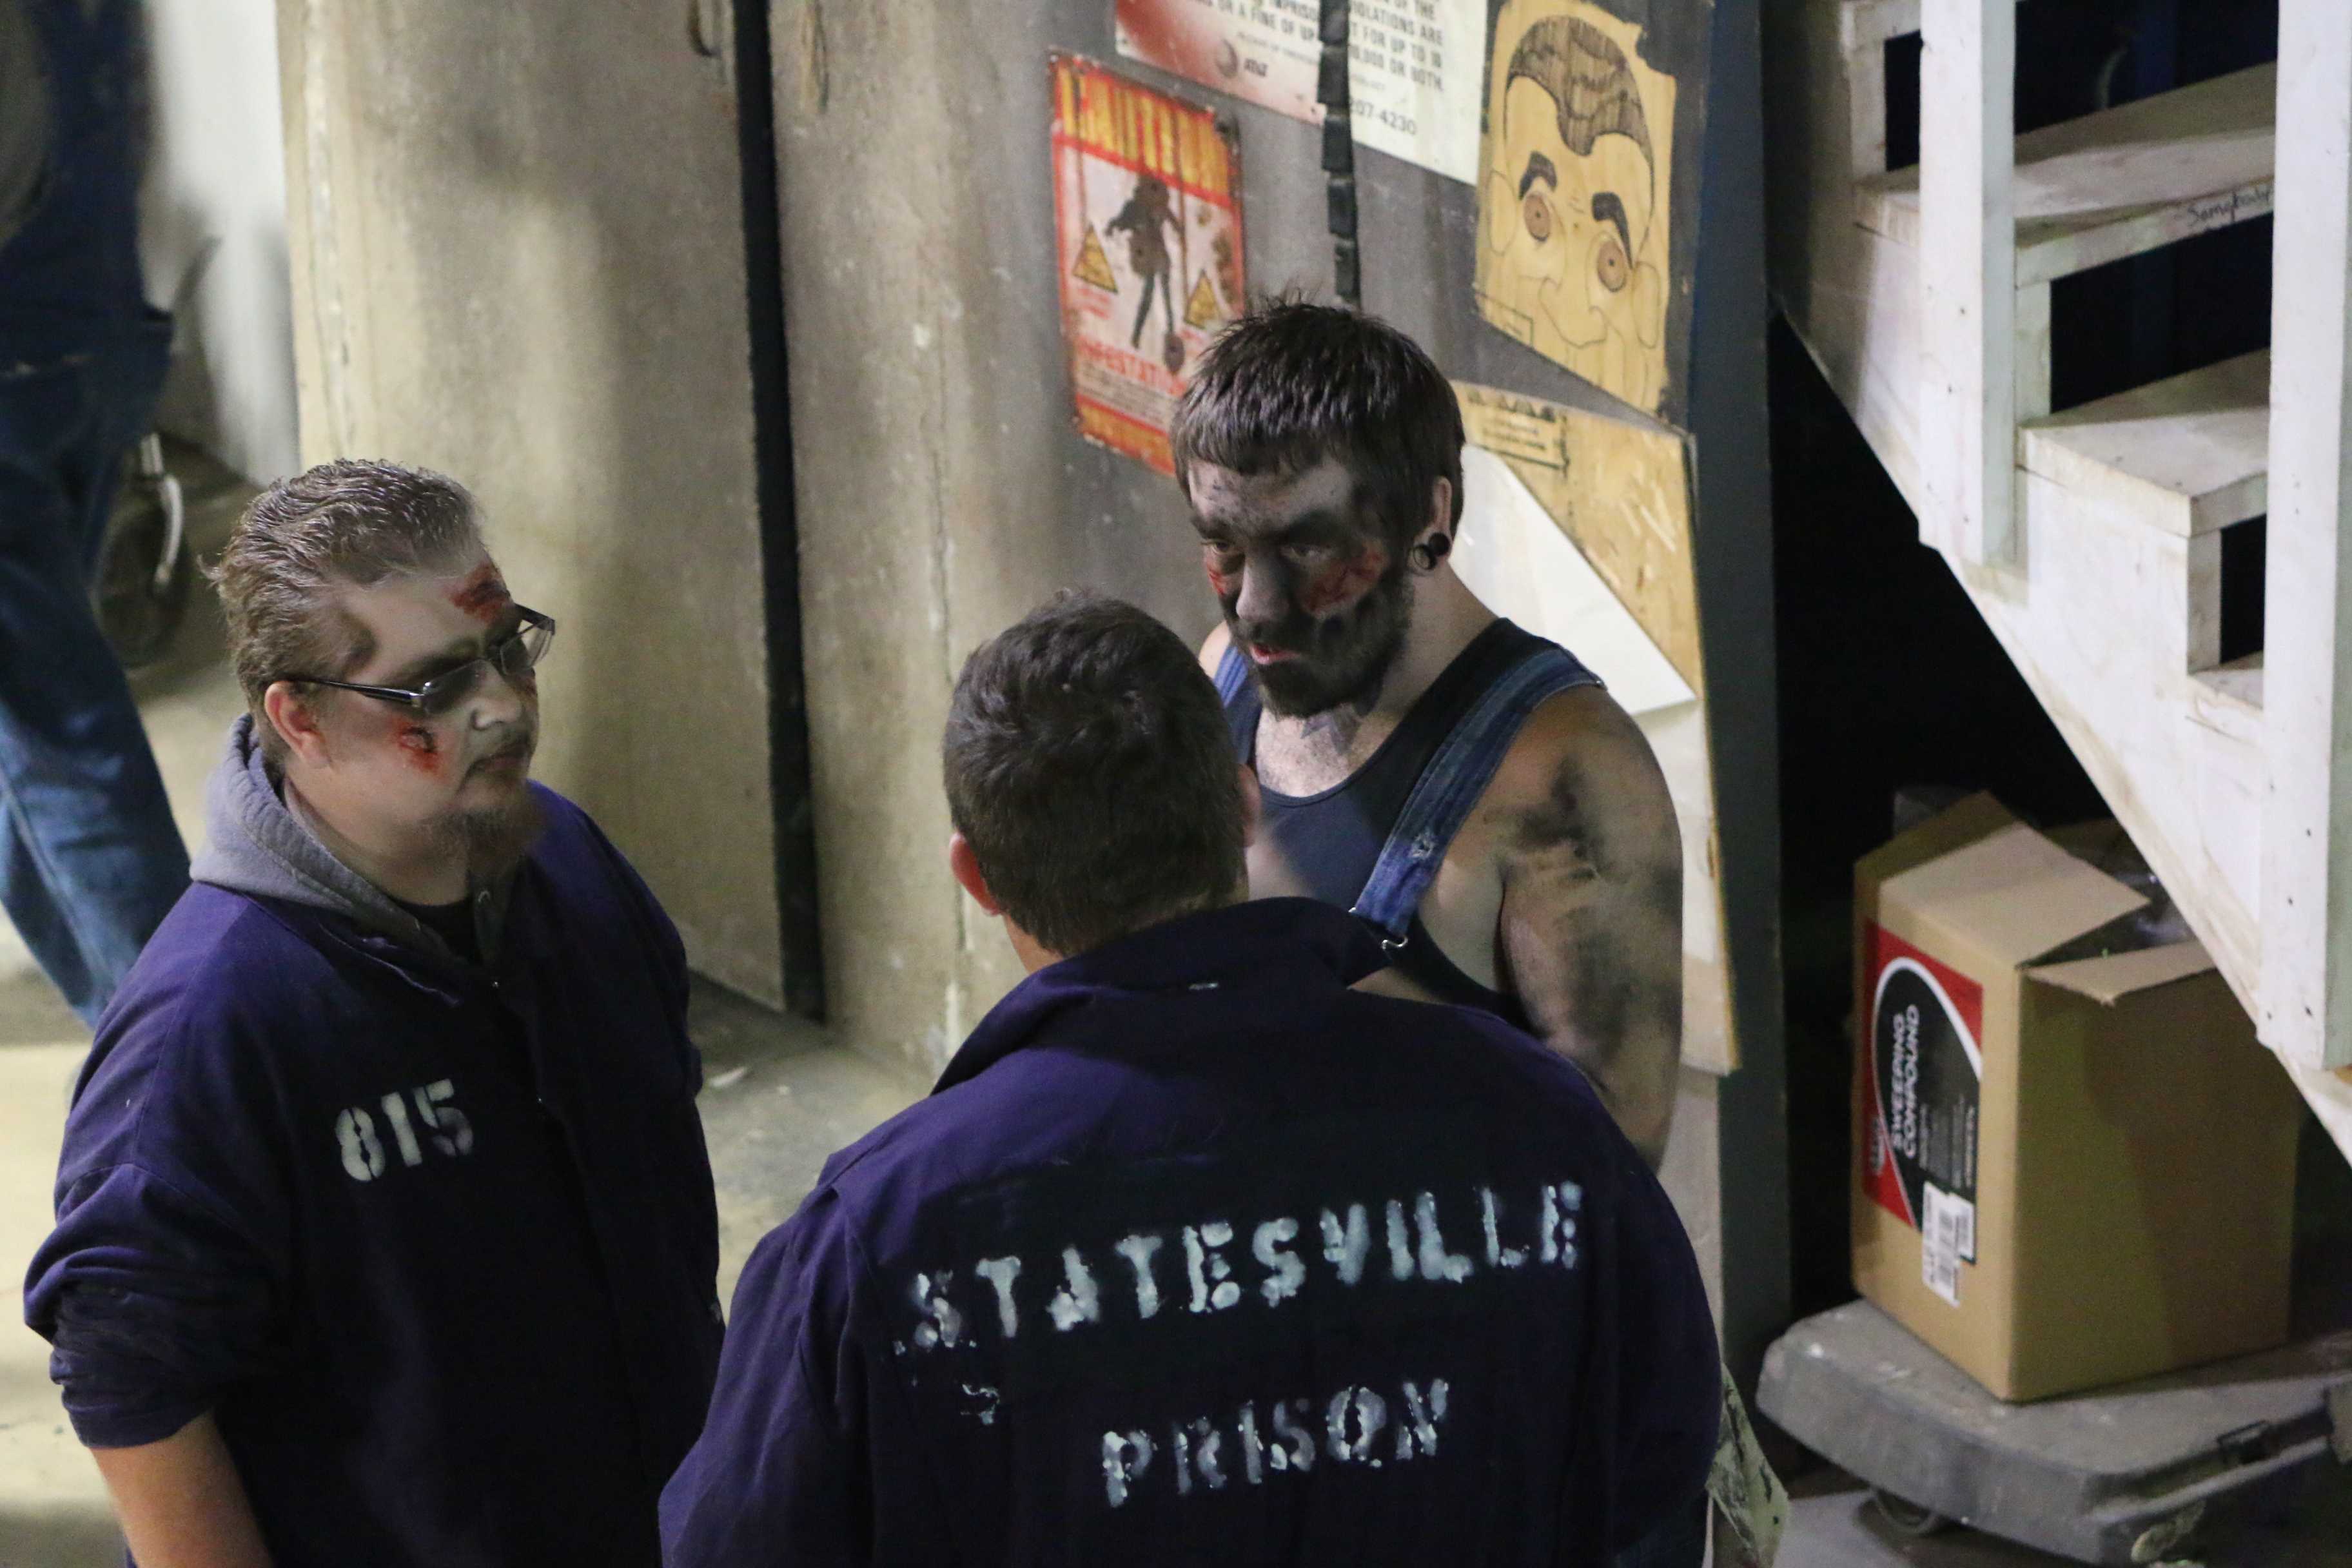 PHOTO+GALLERY%3A+Behind+the+scenes%2C+Statesville+Haunted+Prison